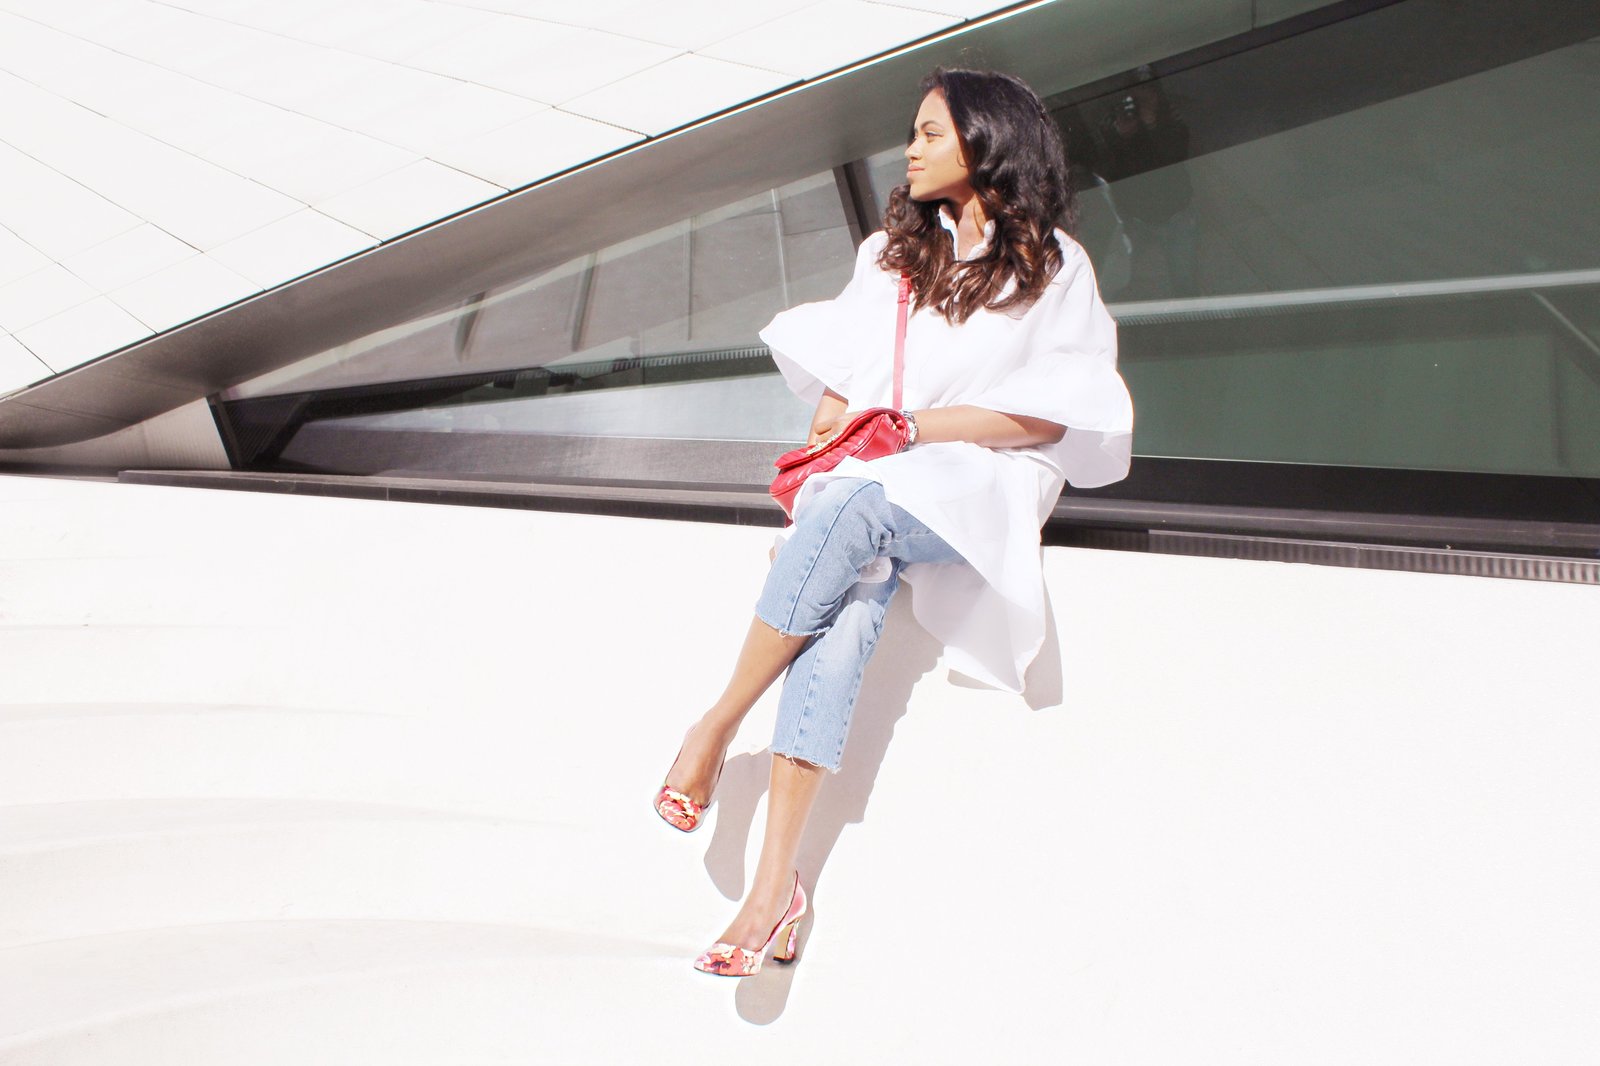 Sachini sitting wearing a white dress, red Gucci shoes and Levi's jeans